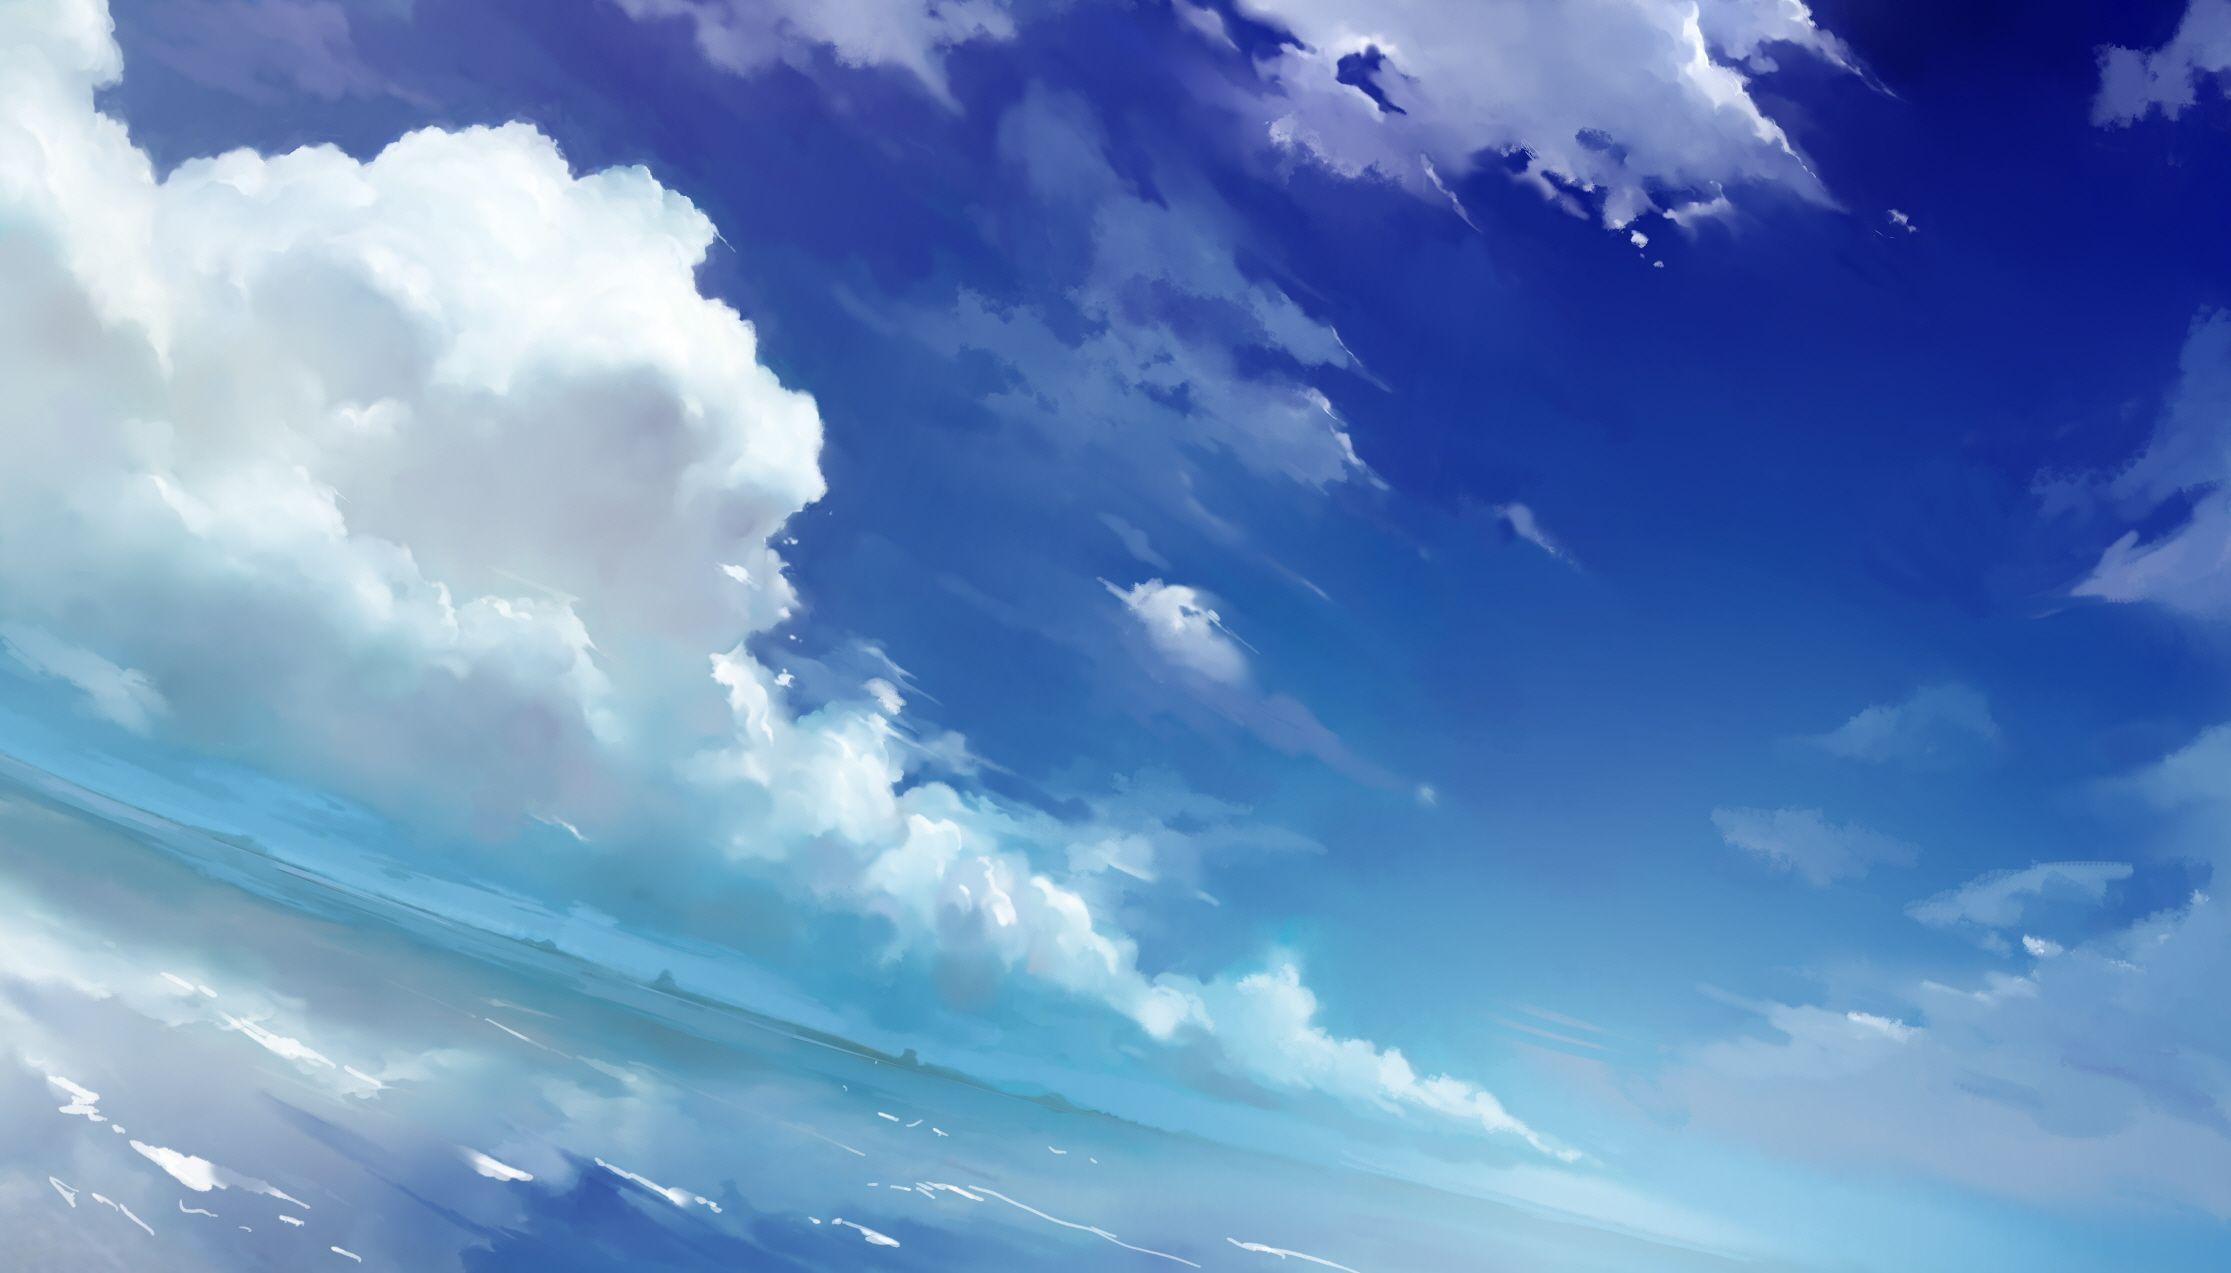 100+] Anime Cloud Wallpapers | Wallpapers.com